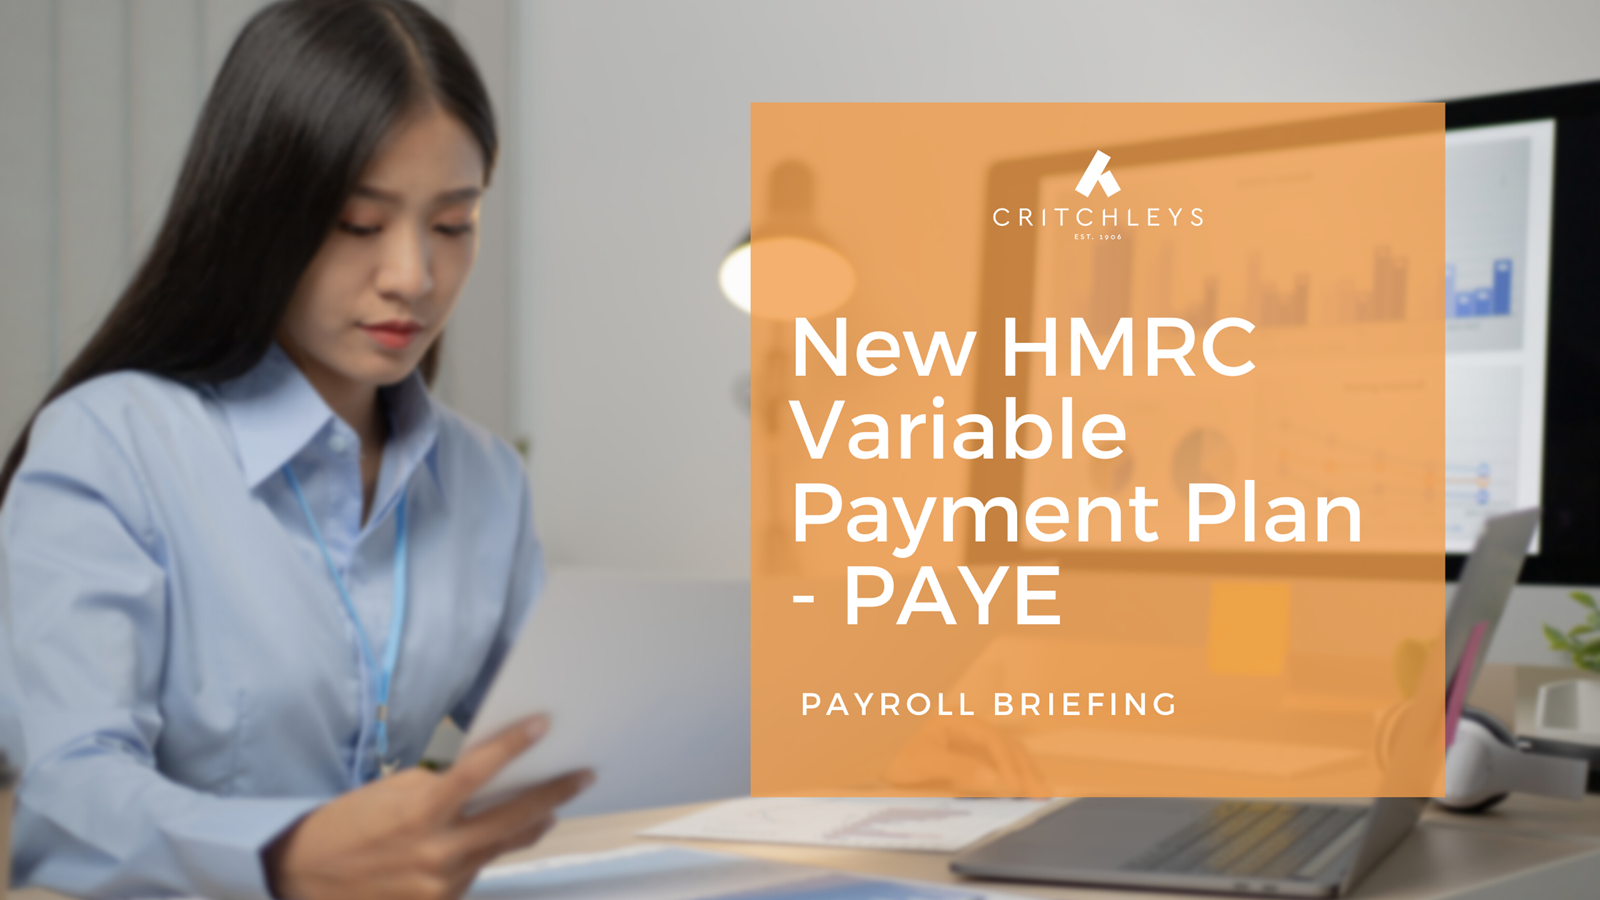 New HMRC Variable Payment Plan - PAYE